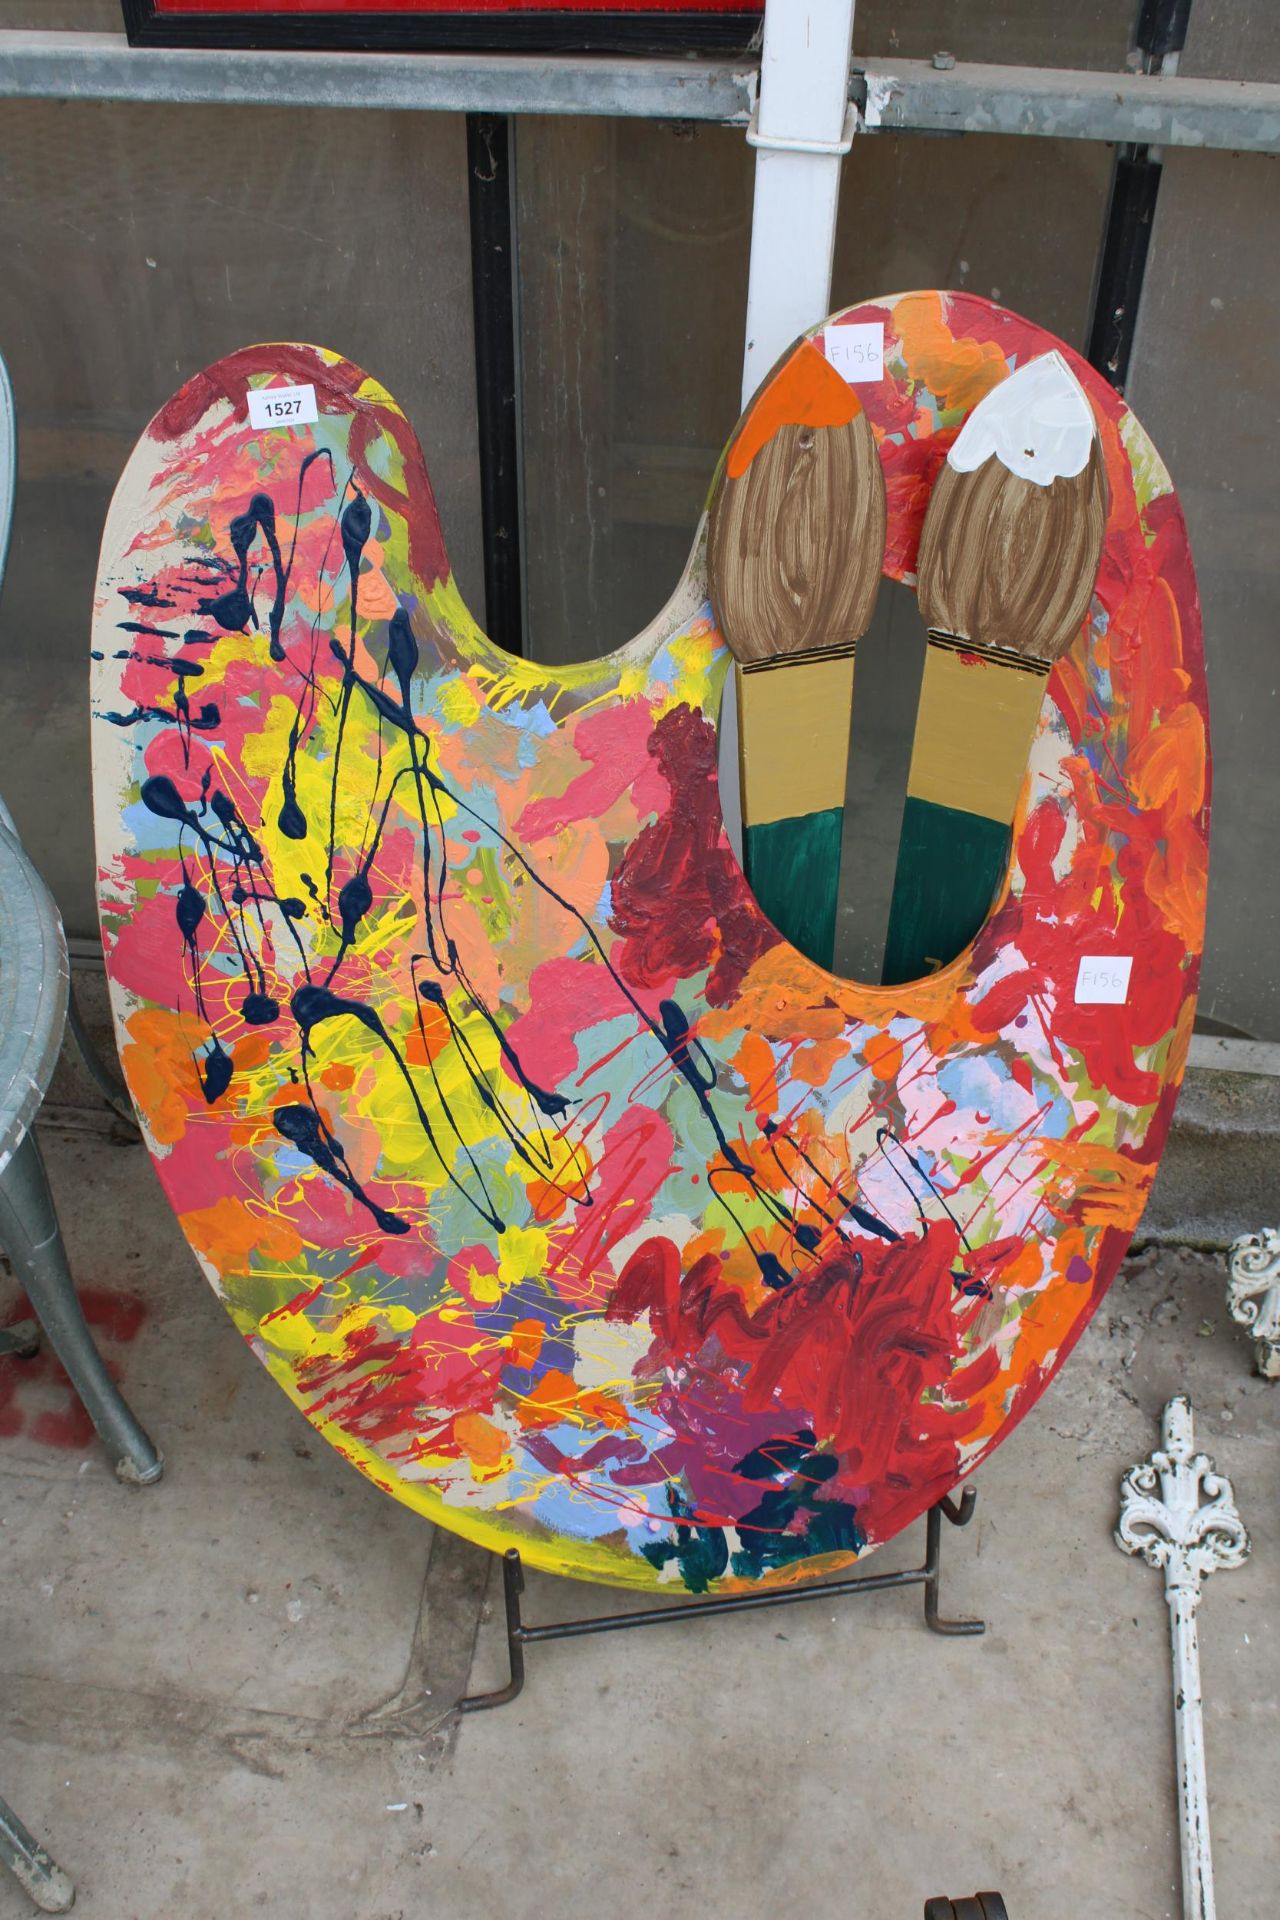 A LARGE WOODEN ARTIST PALLET AND TWO PAINT BRUSHES